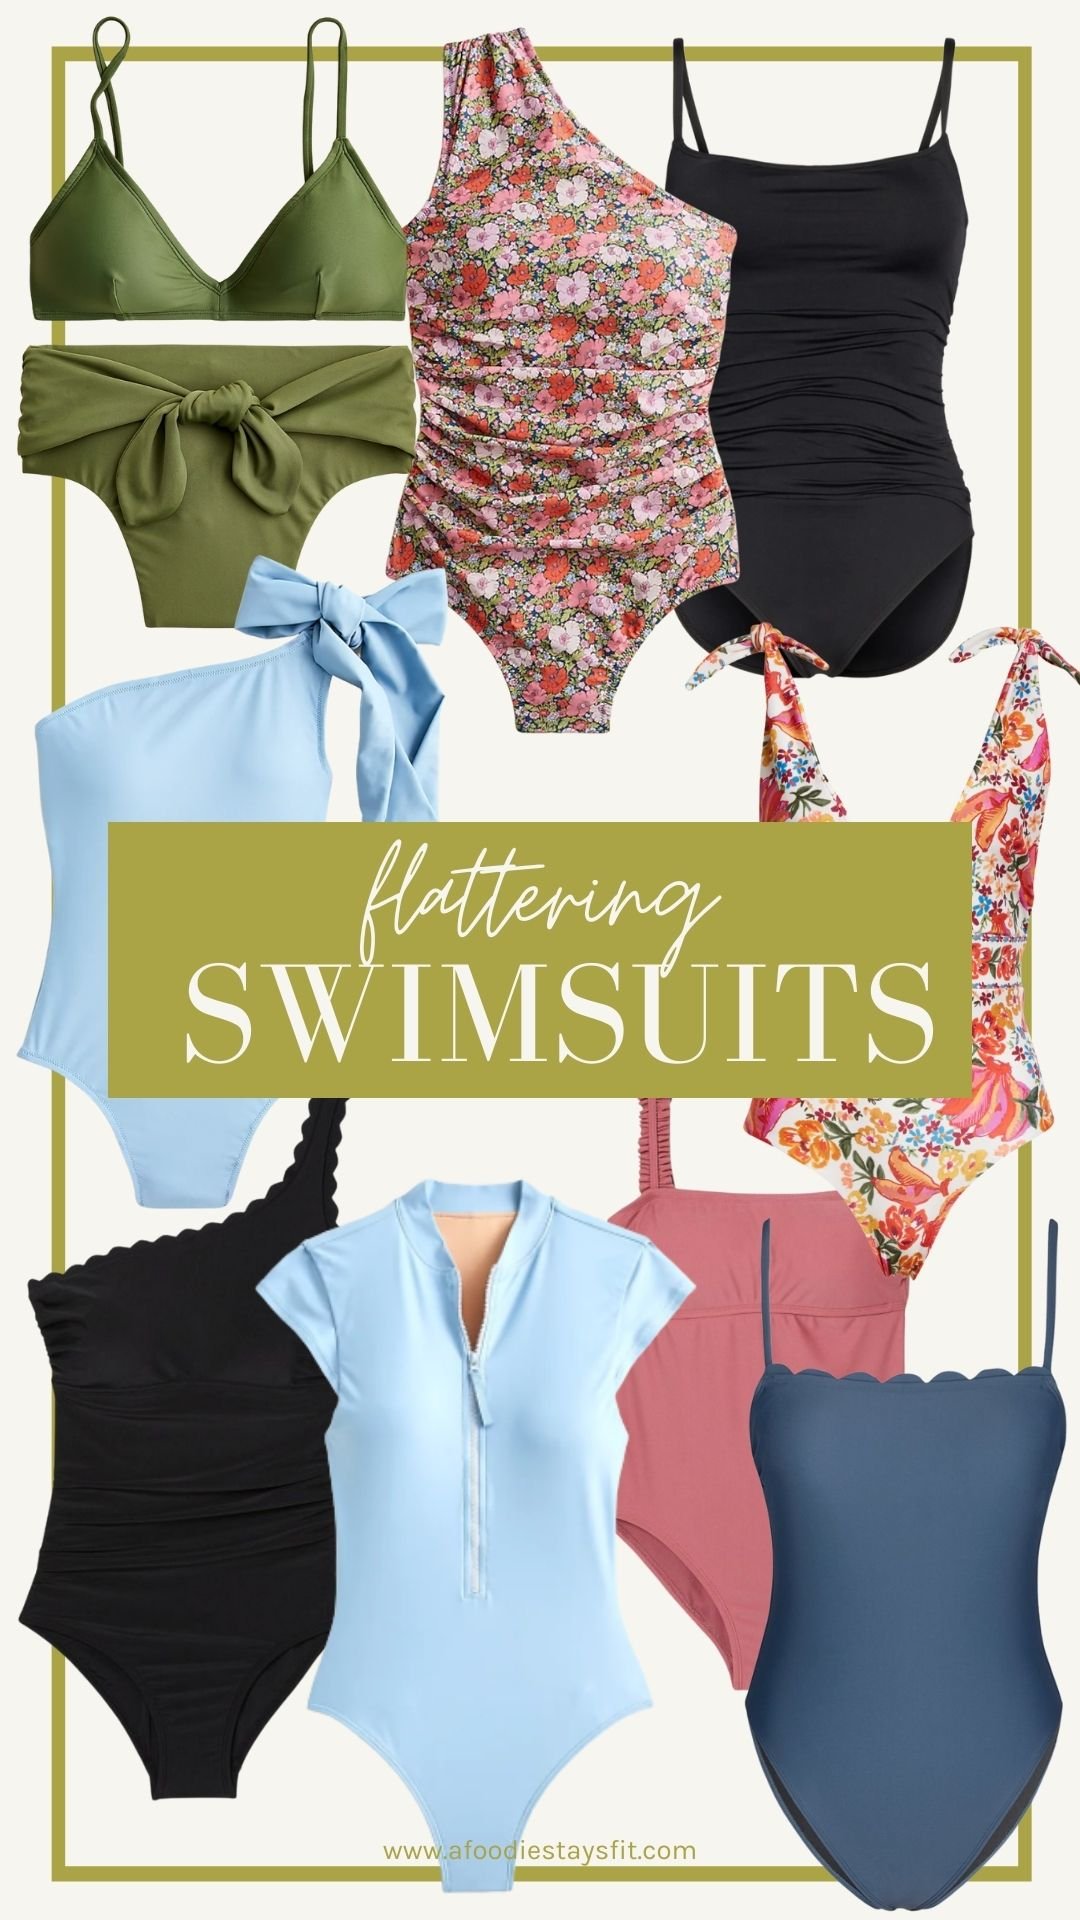 Flattering Swimsuits